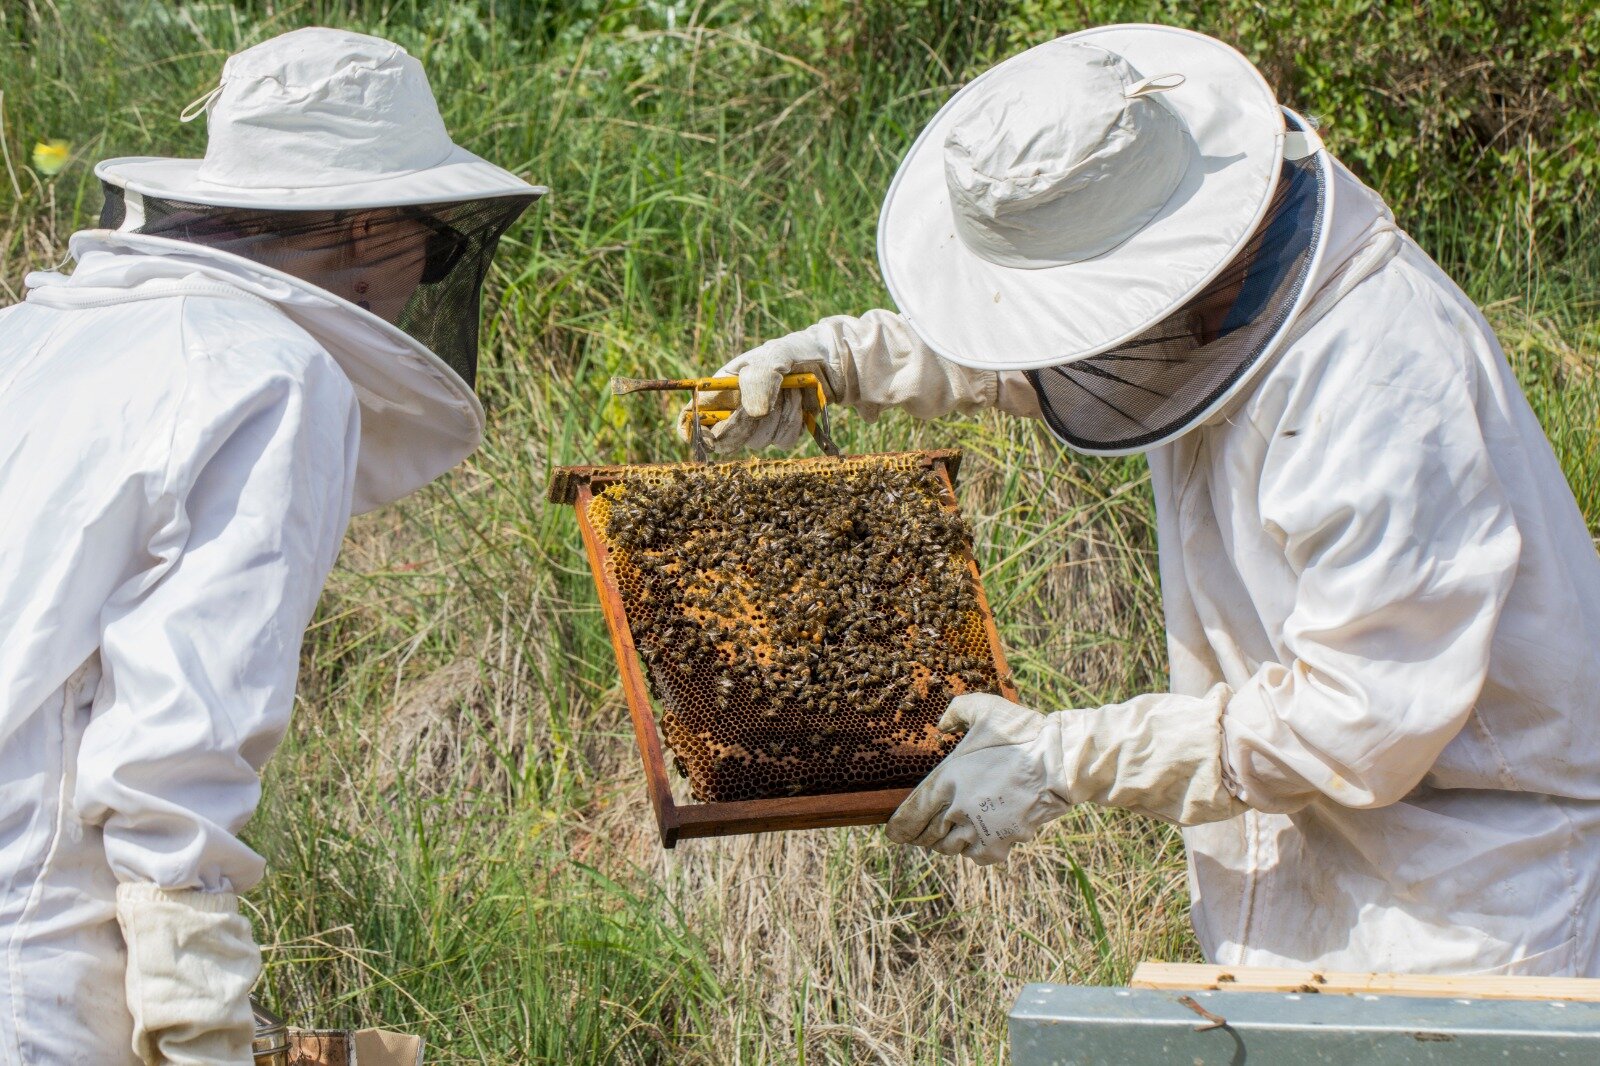 Beekeeping with social impact